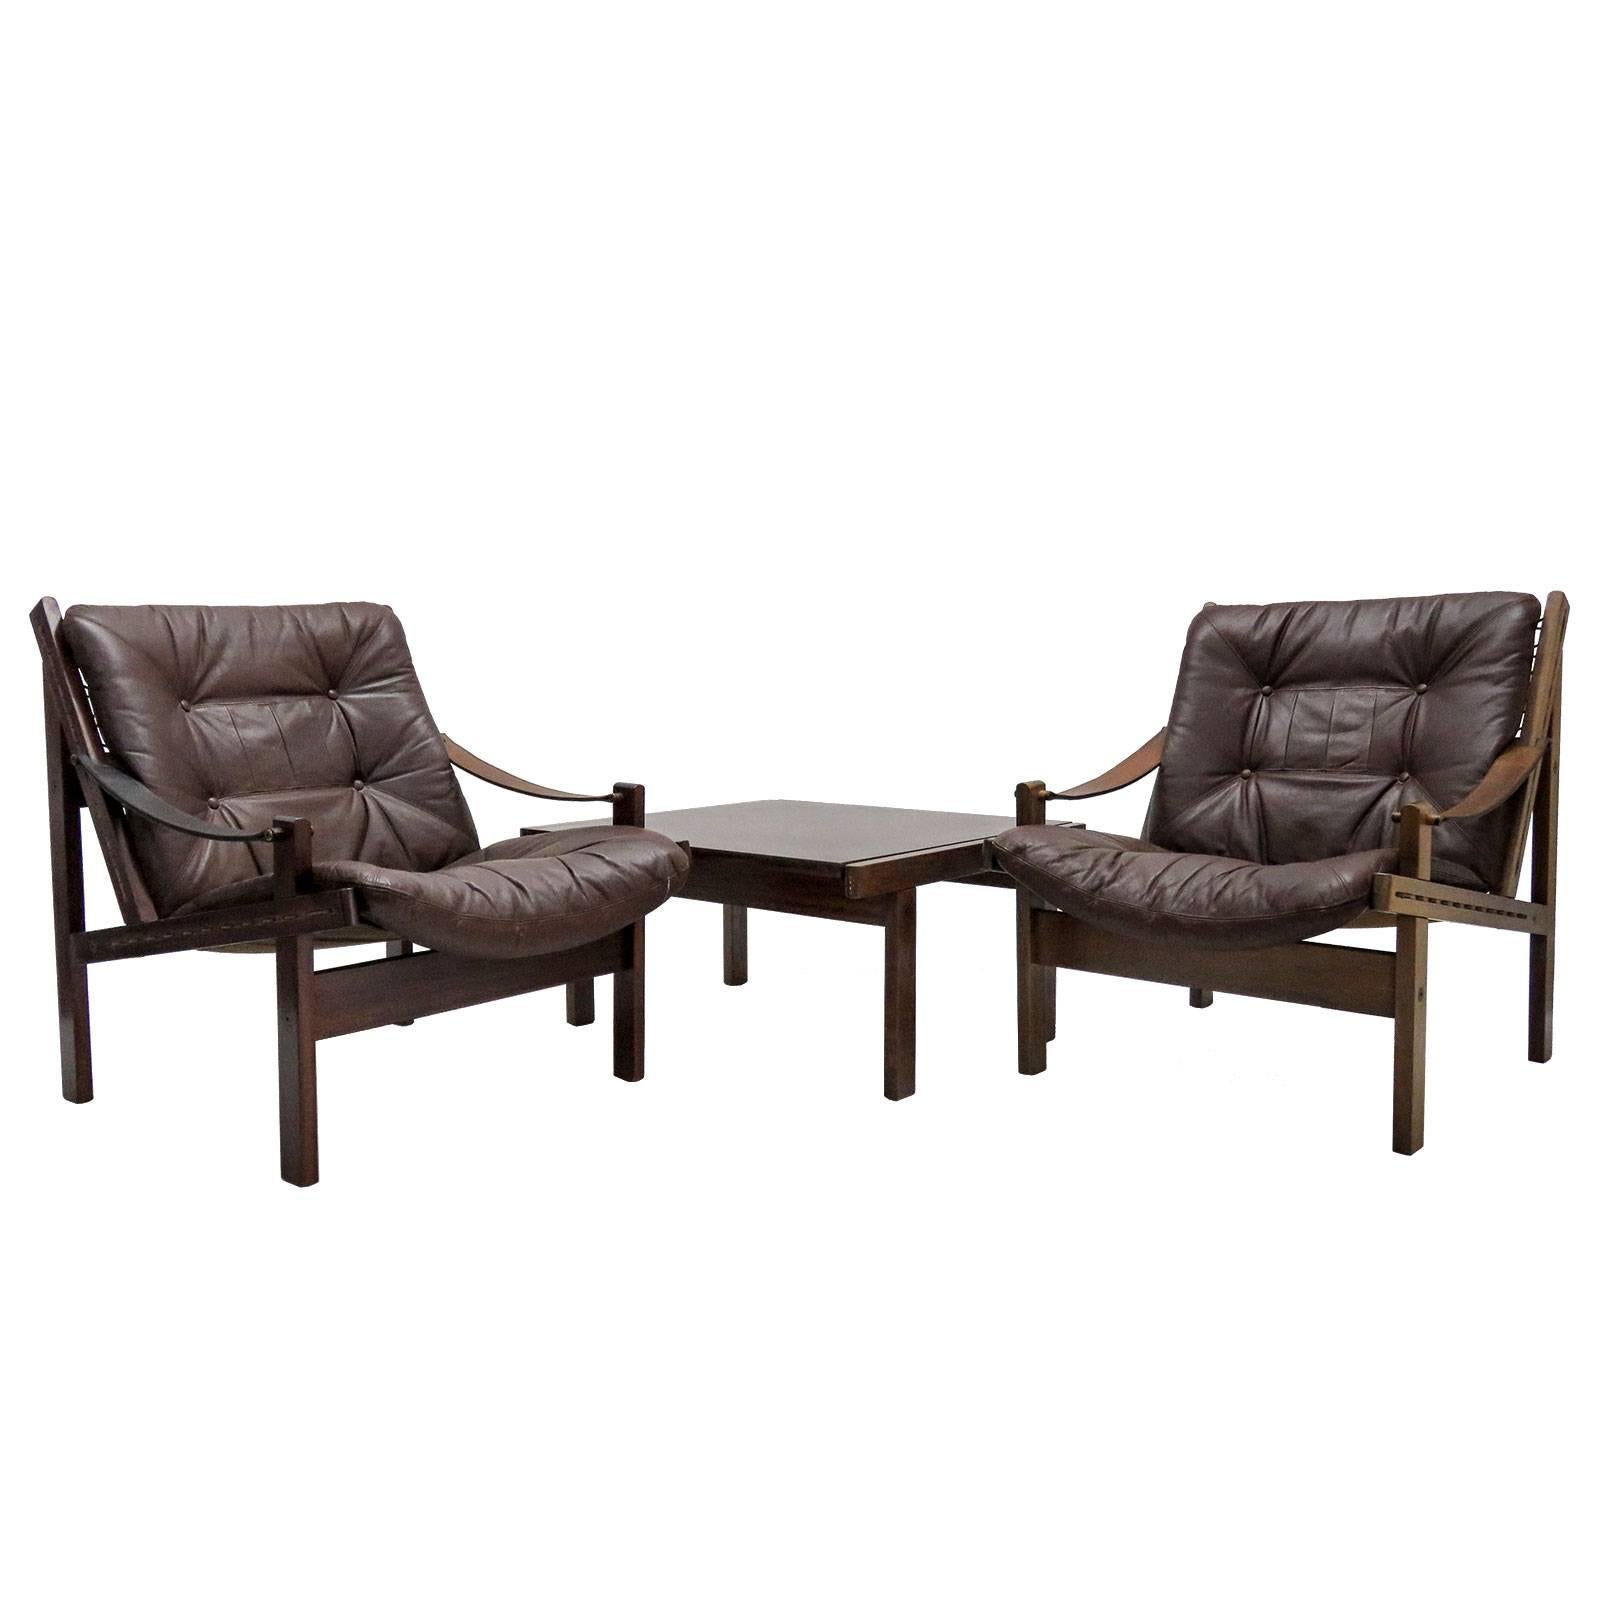 Pair of Danish Leather Chairs with Coffee Table